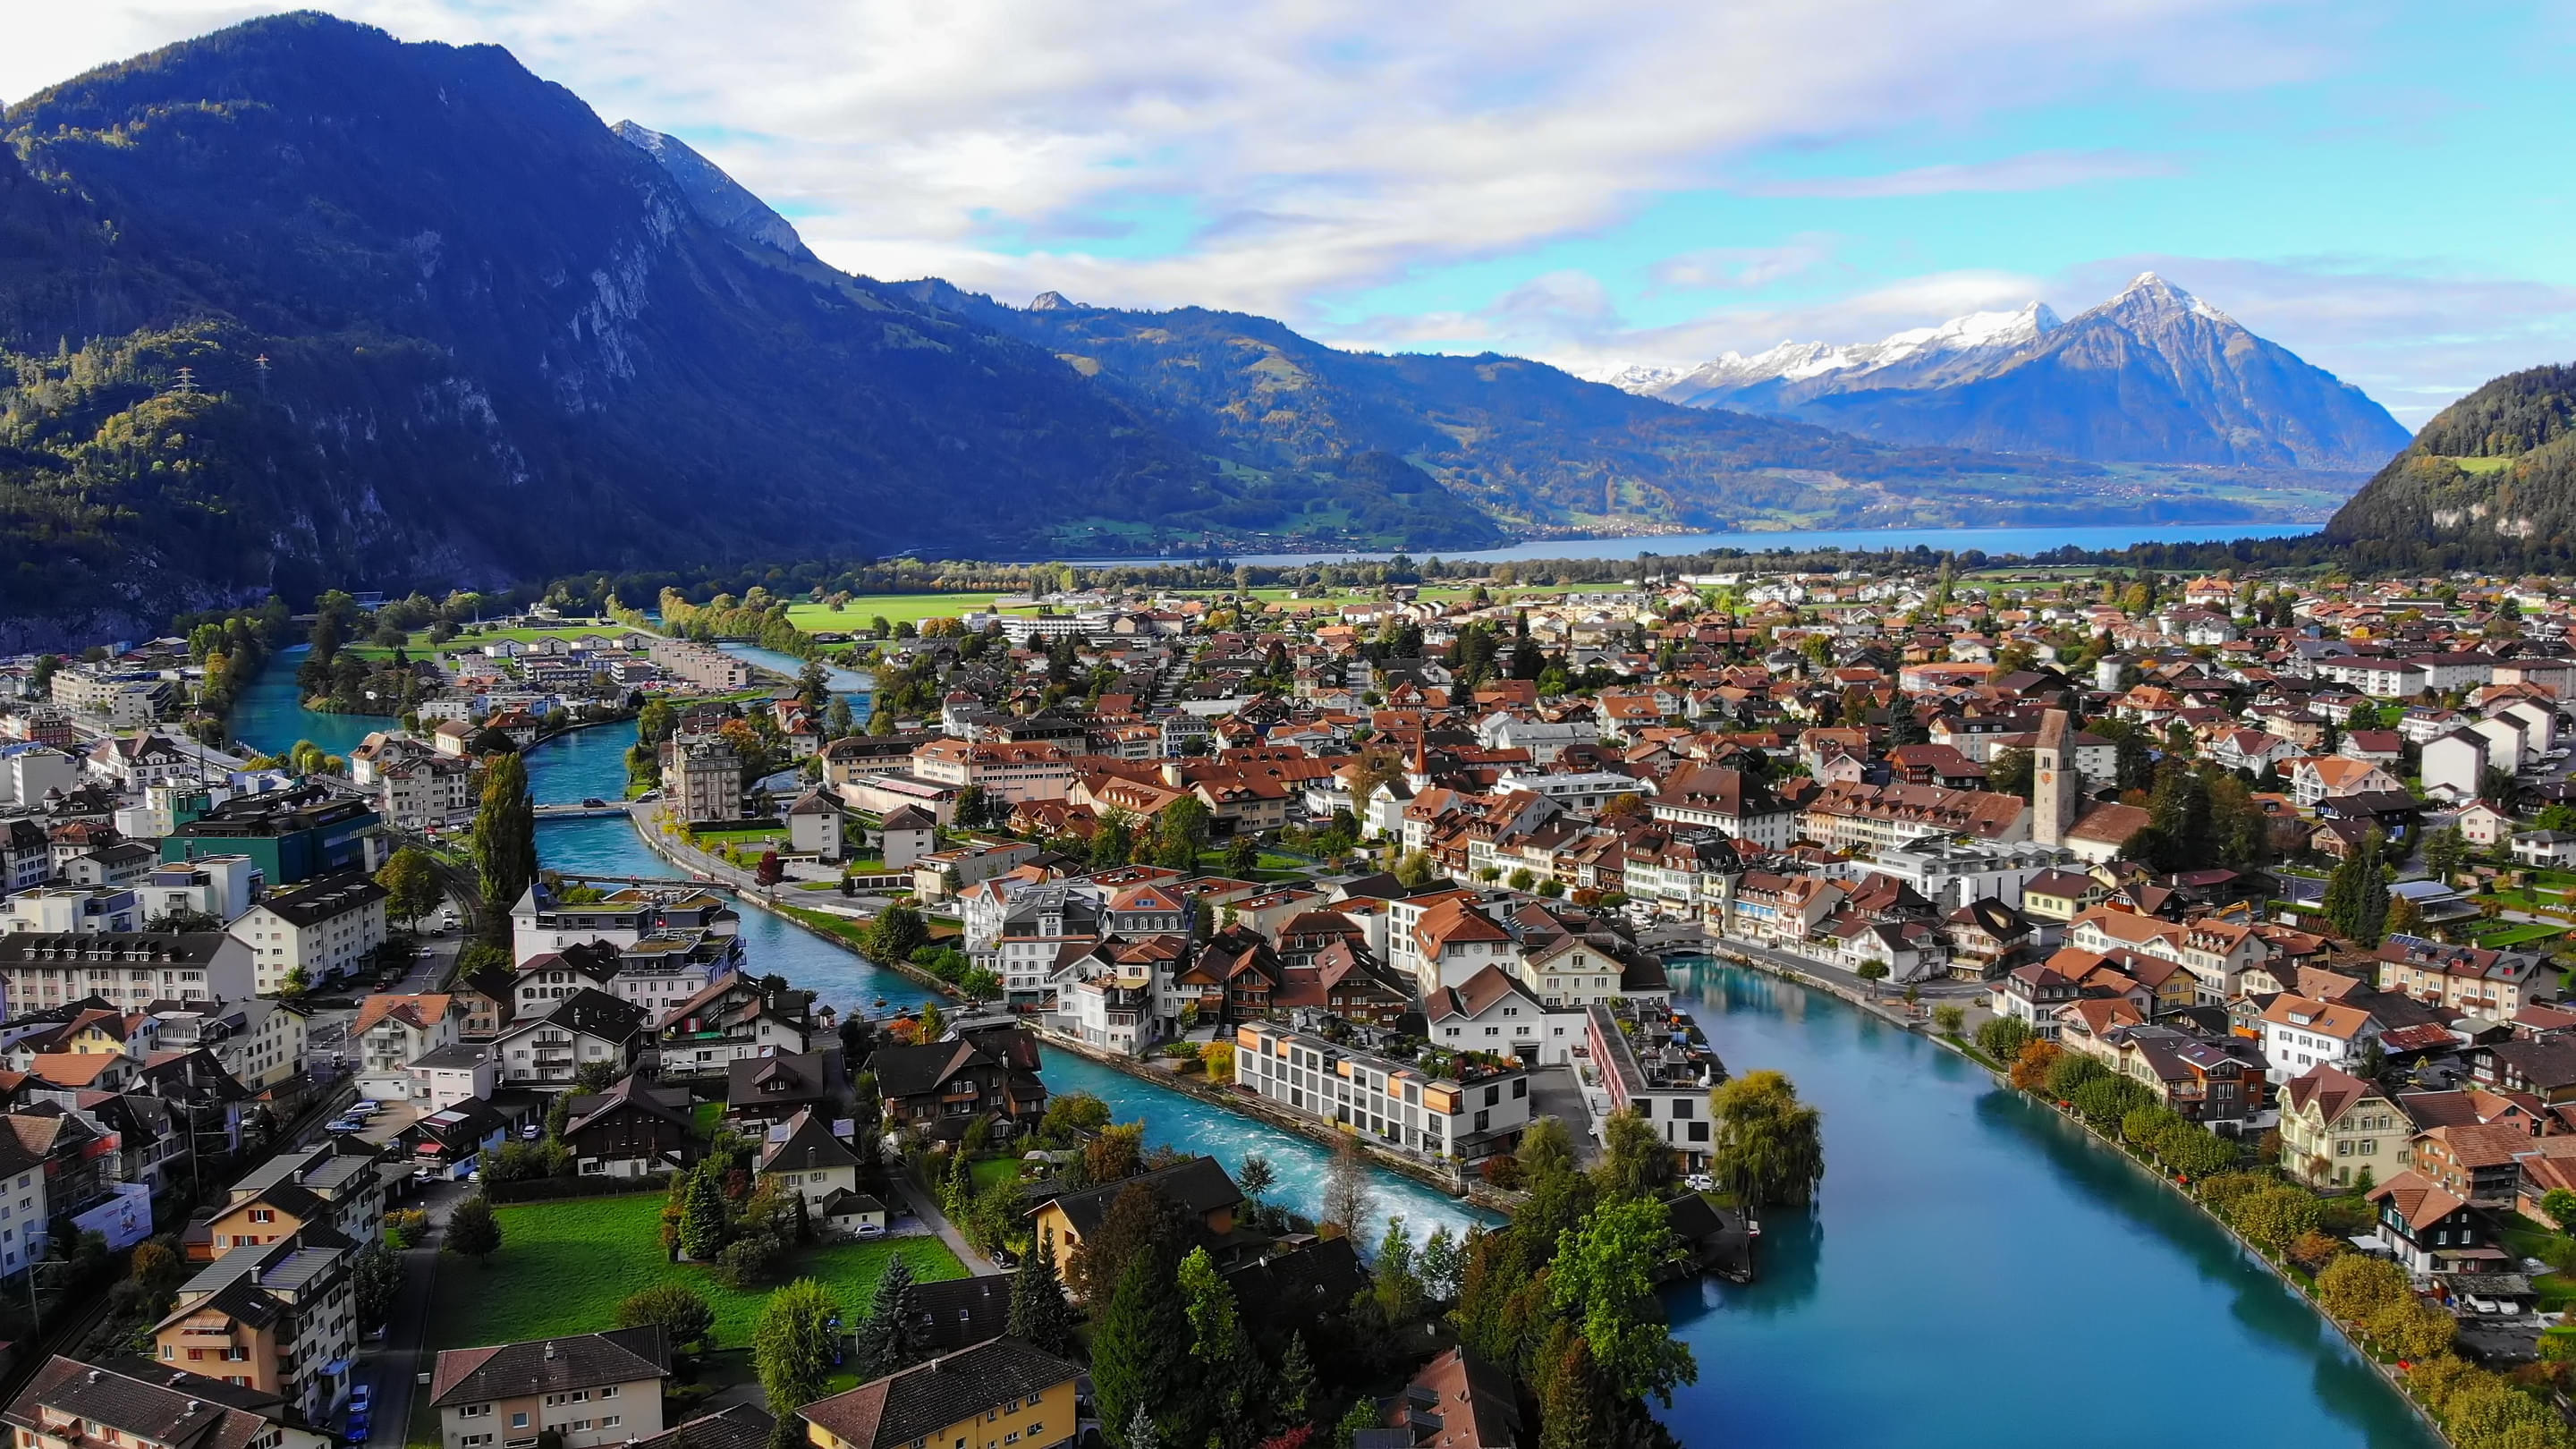 Best Places To Stay in Interlaken